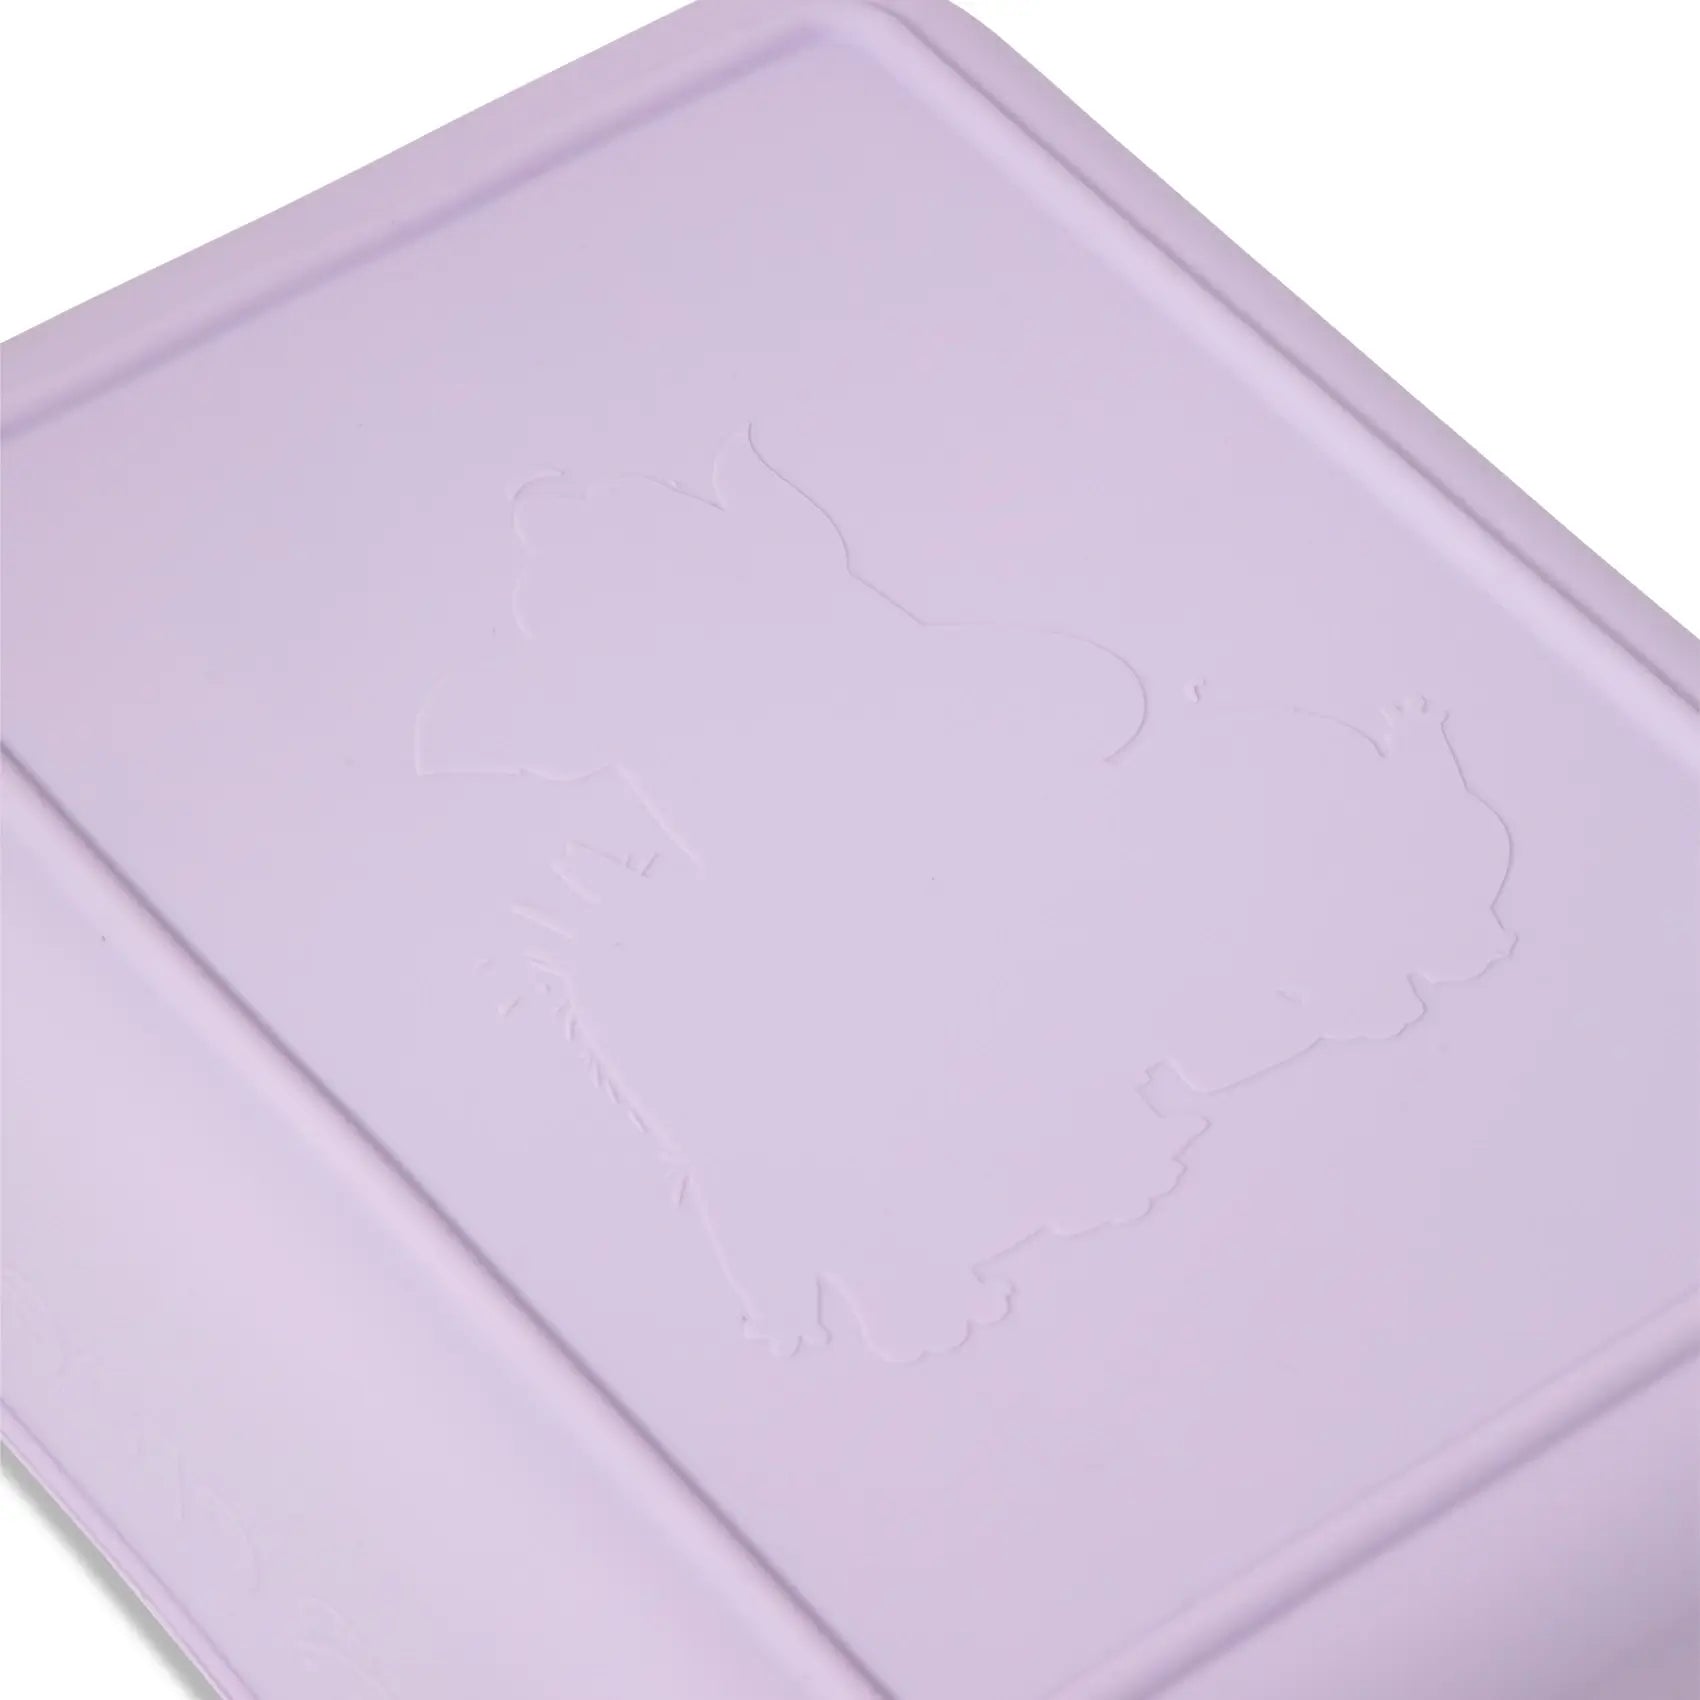 oloe-character-silicone-lunchbox-purple-reverse-side